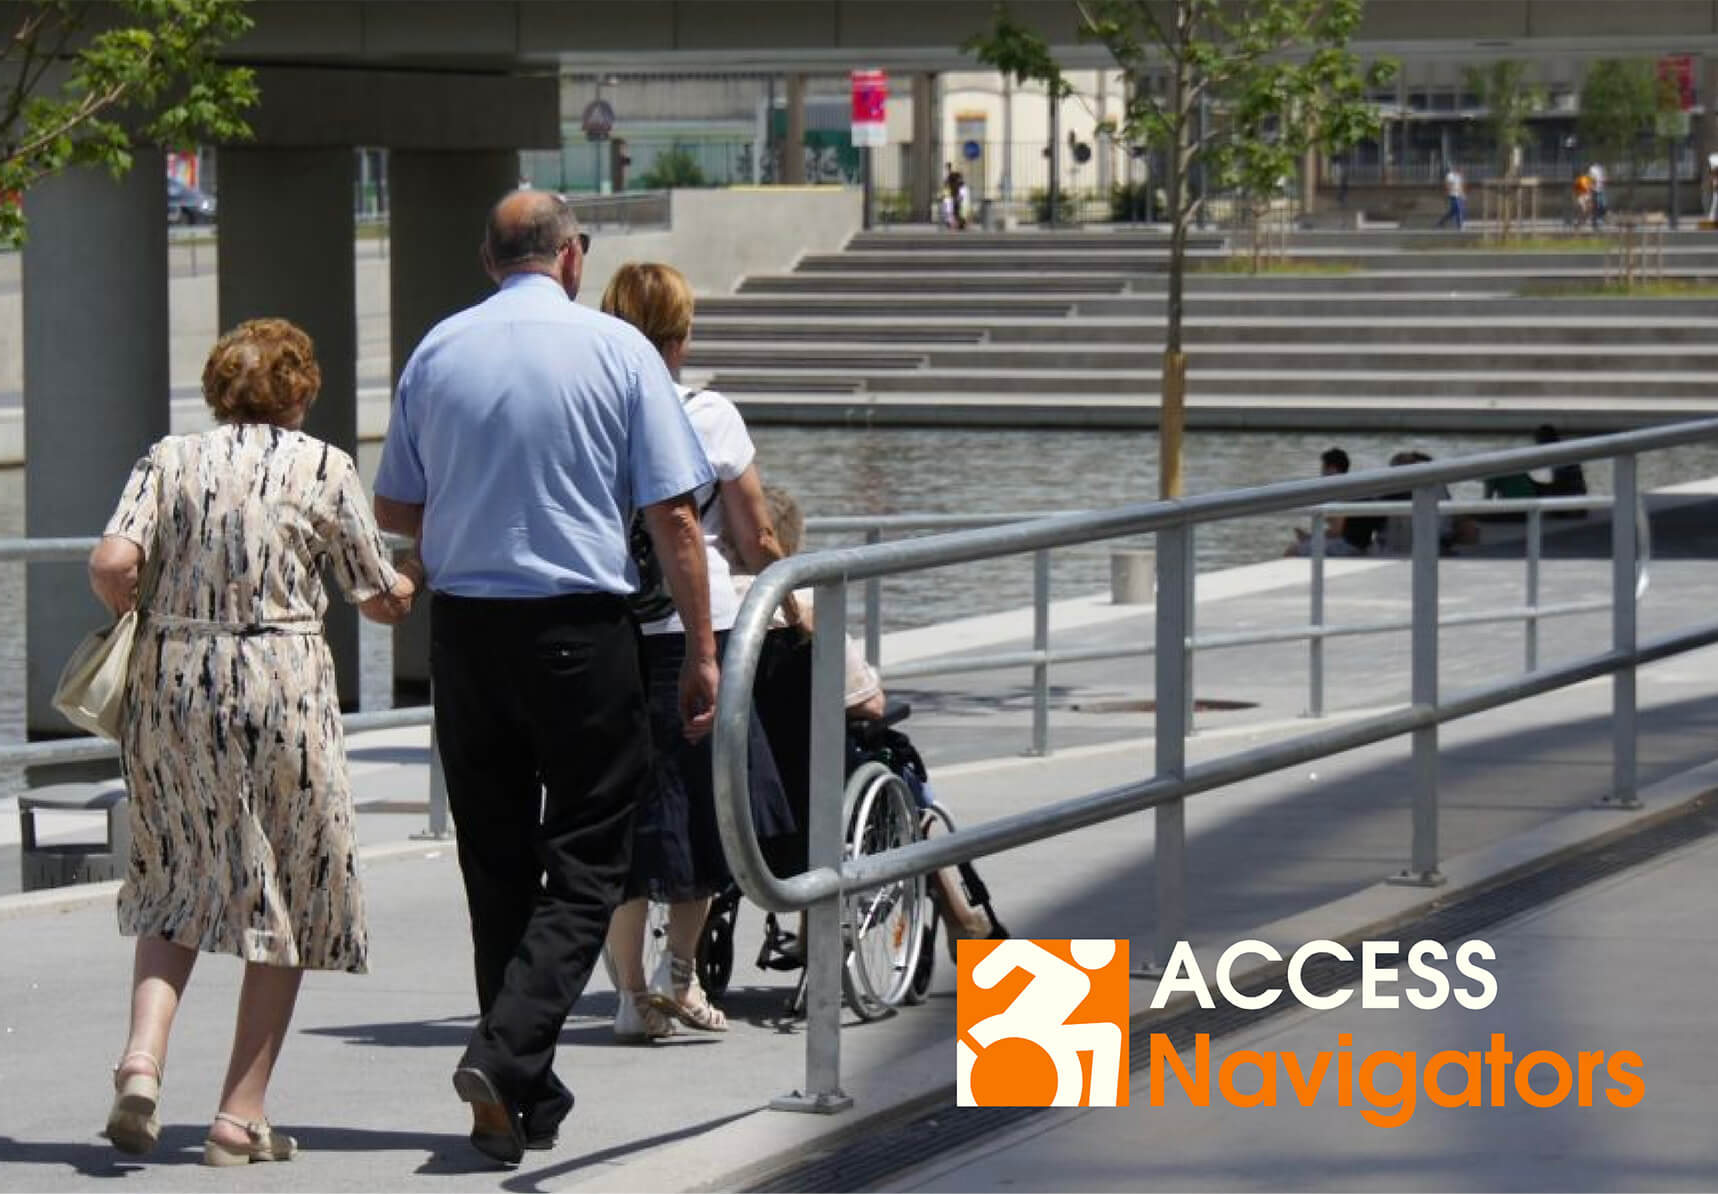 Taken from behind the subjects, an elderly man and woman follow behind someone pushing a person seated in a wheelchair along a stretch of concrete walkway with guardrails on either side.